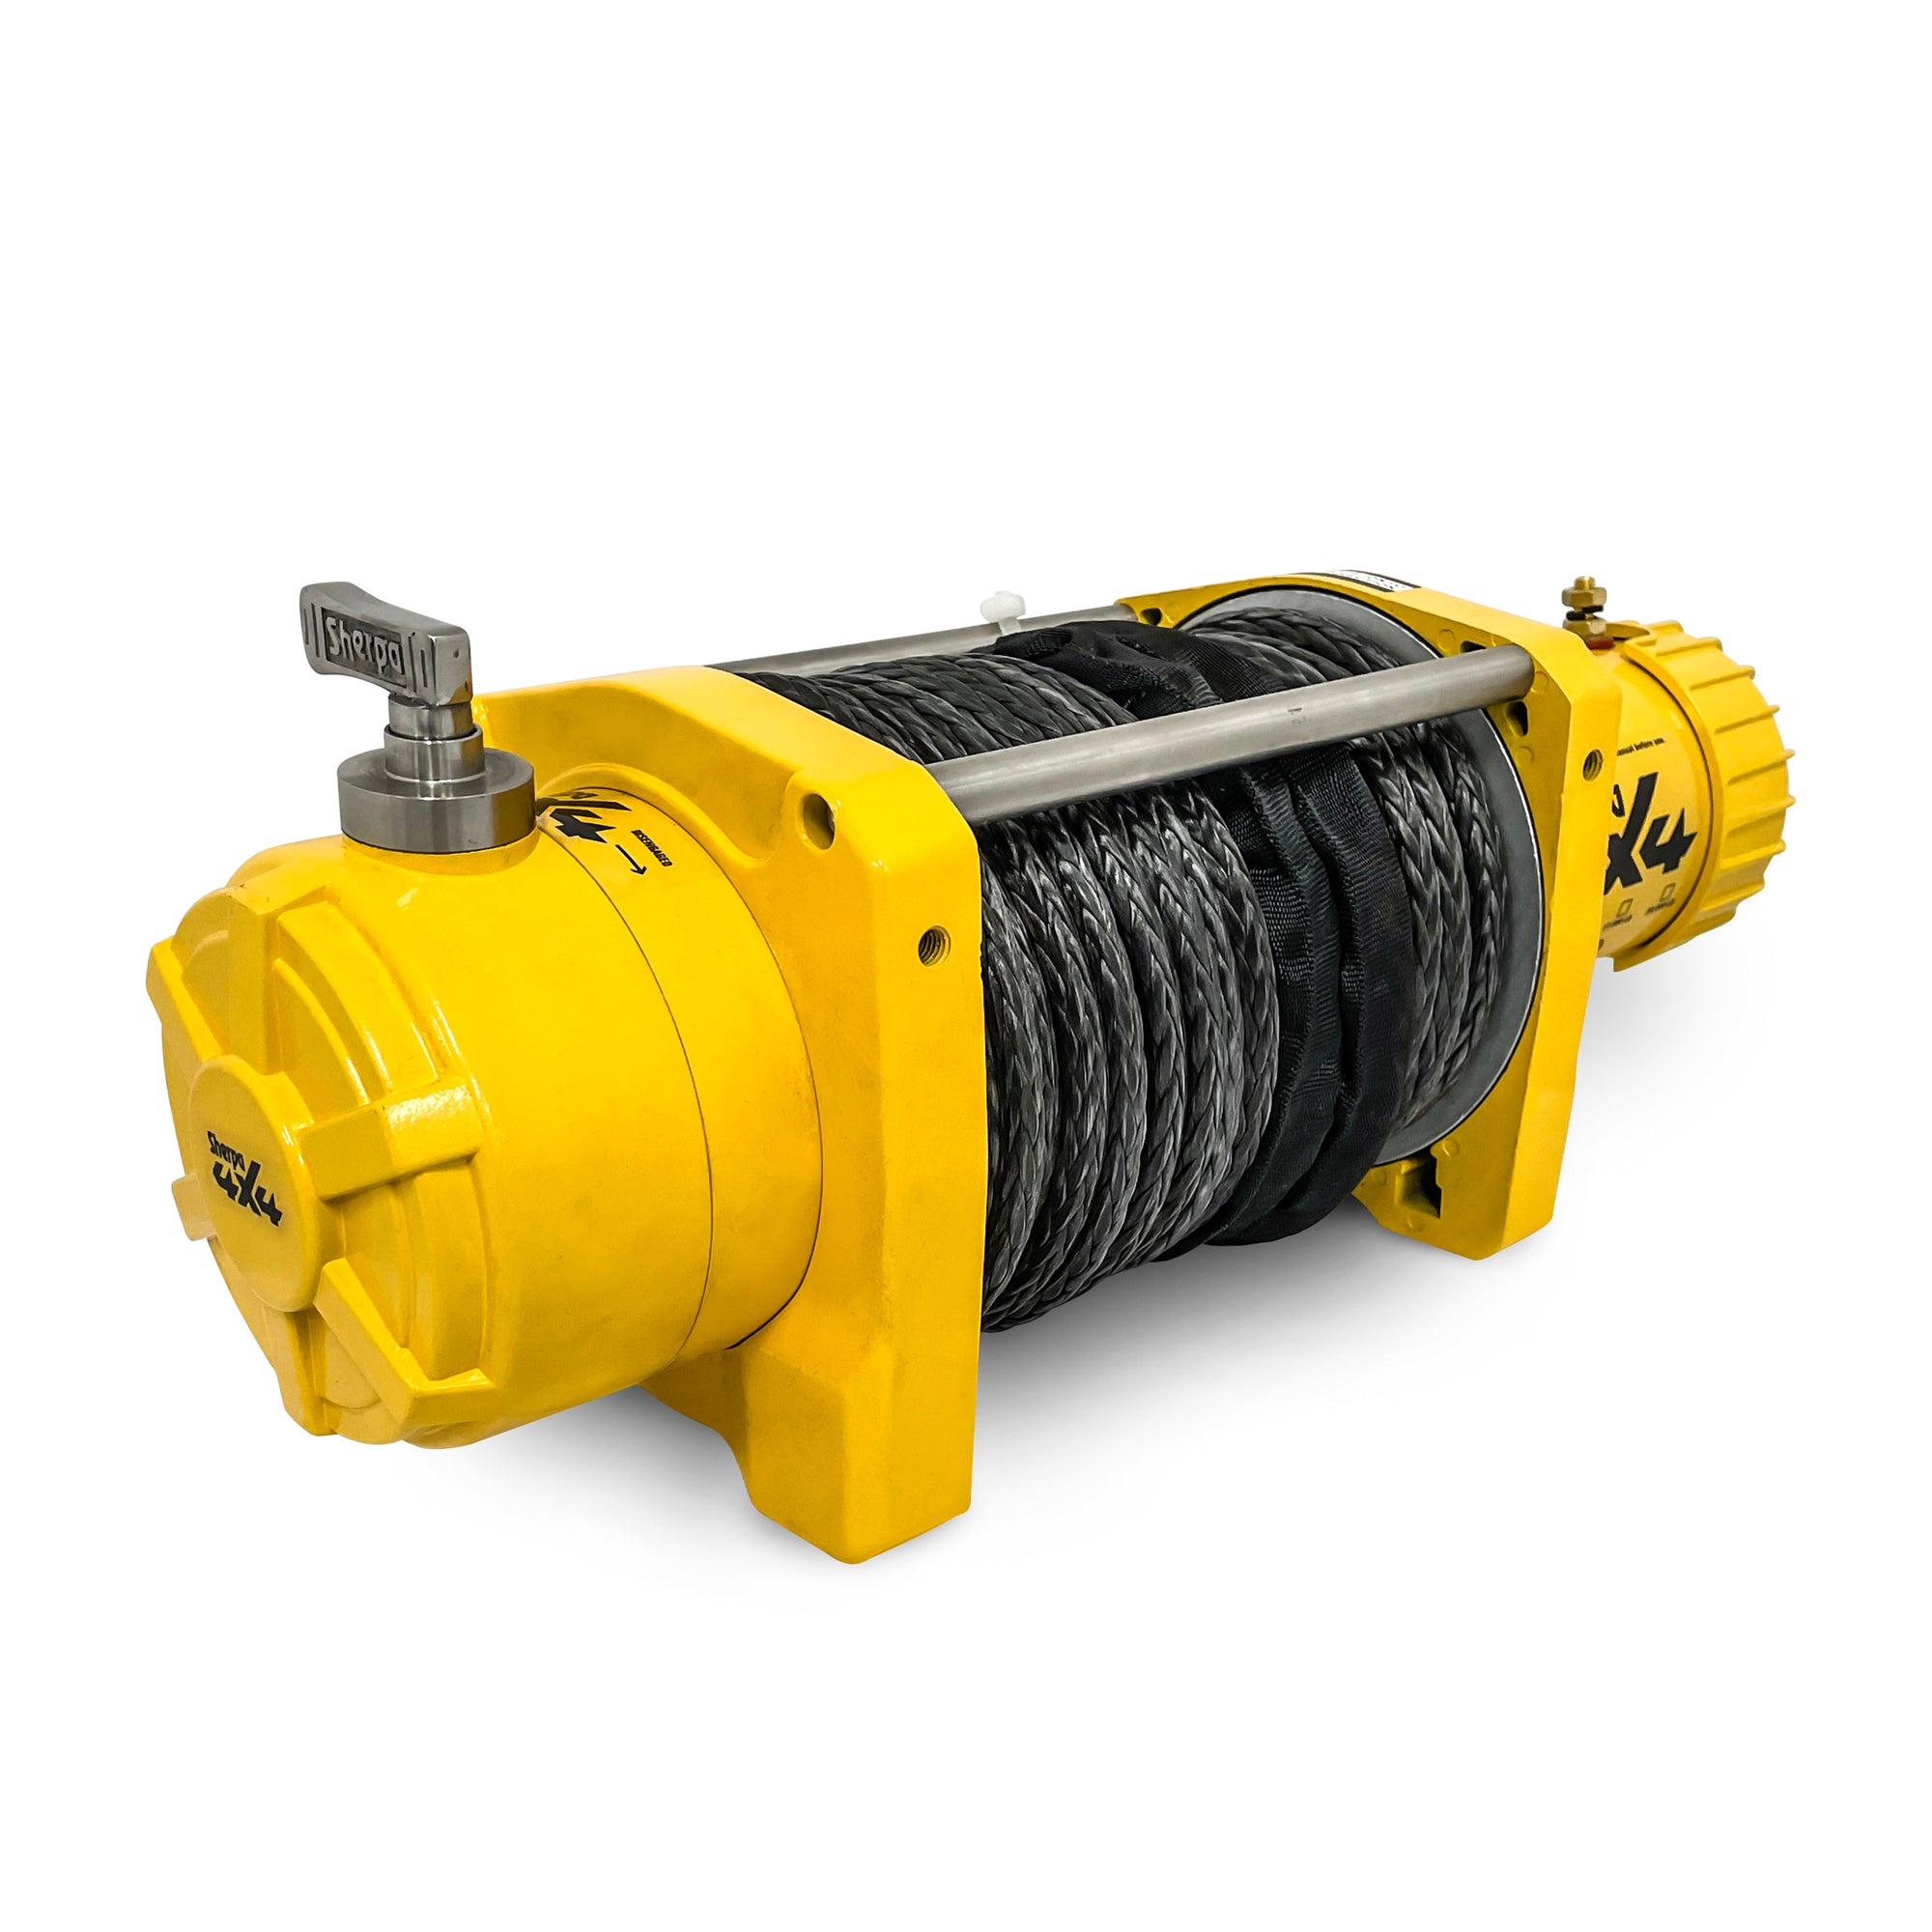 Sherpa 'Brumby' - 10,000Lb High Speed Winch - Sherpa Winches Canada